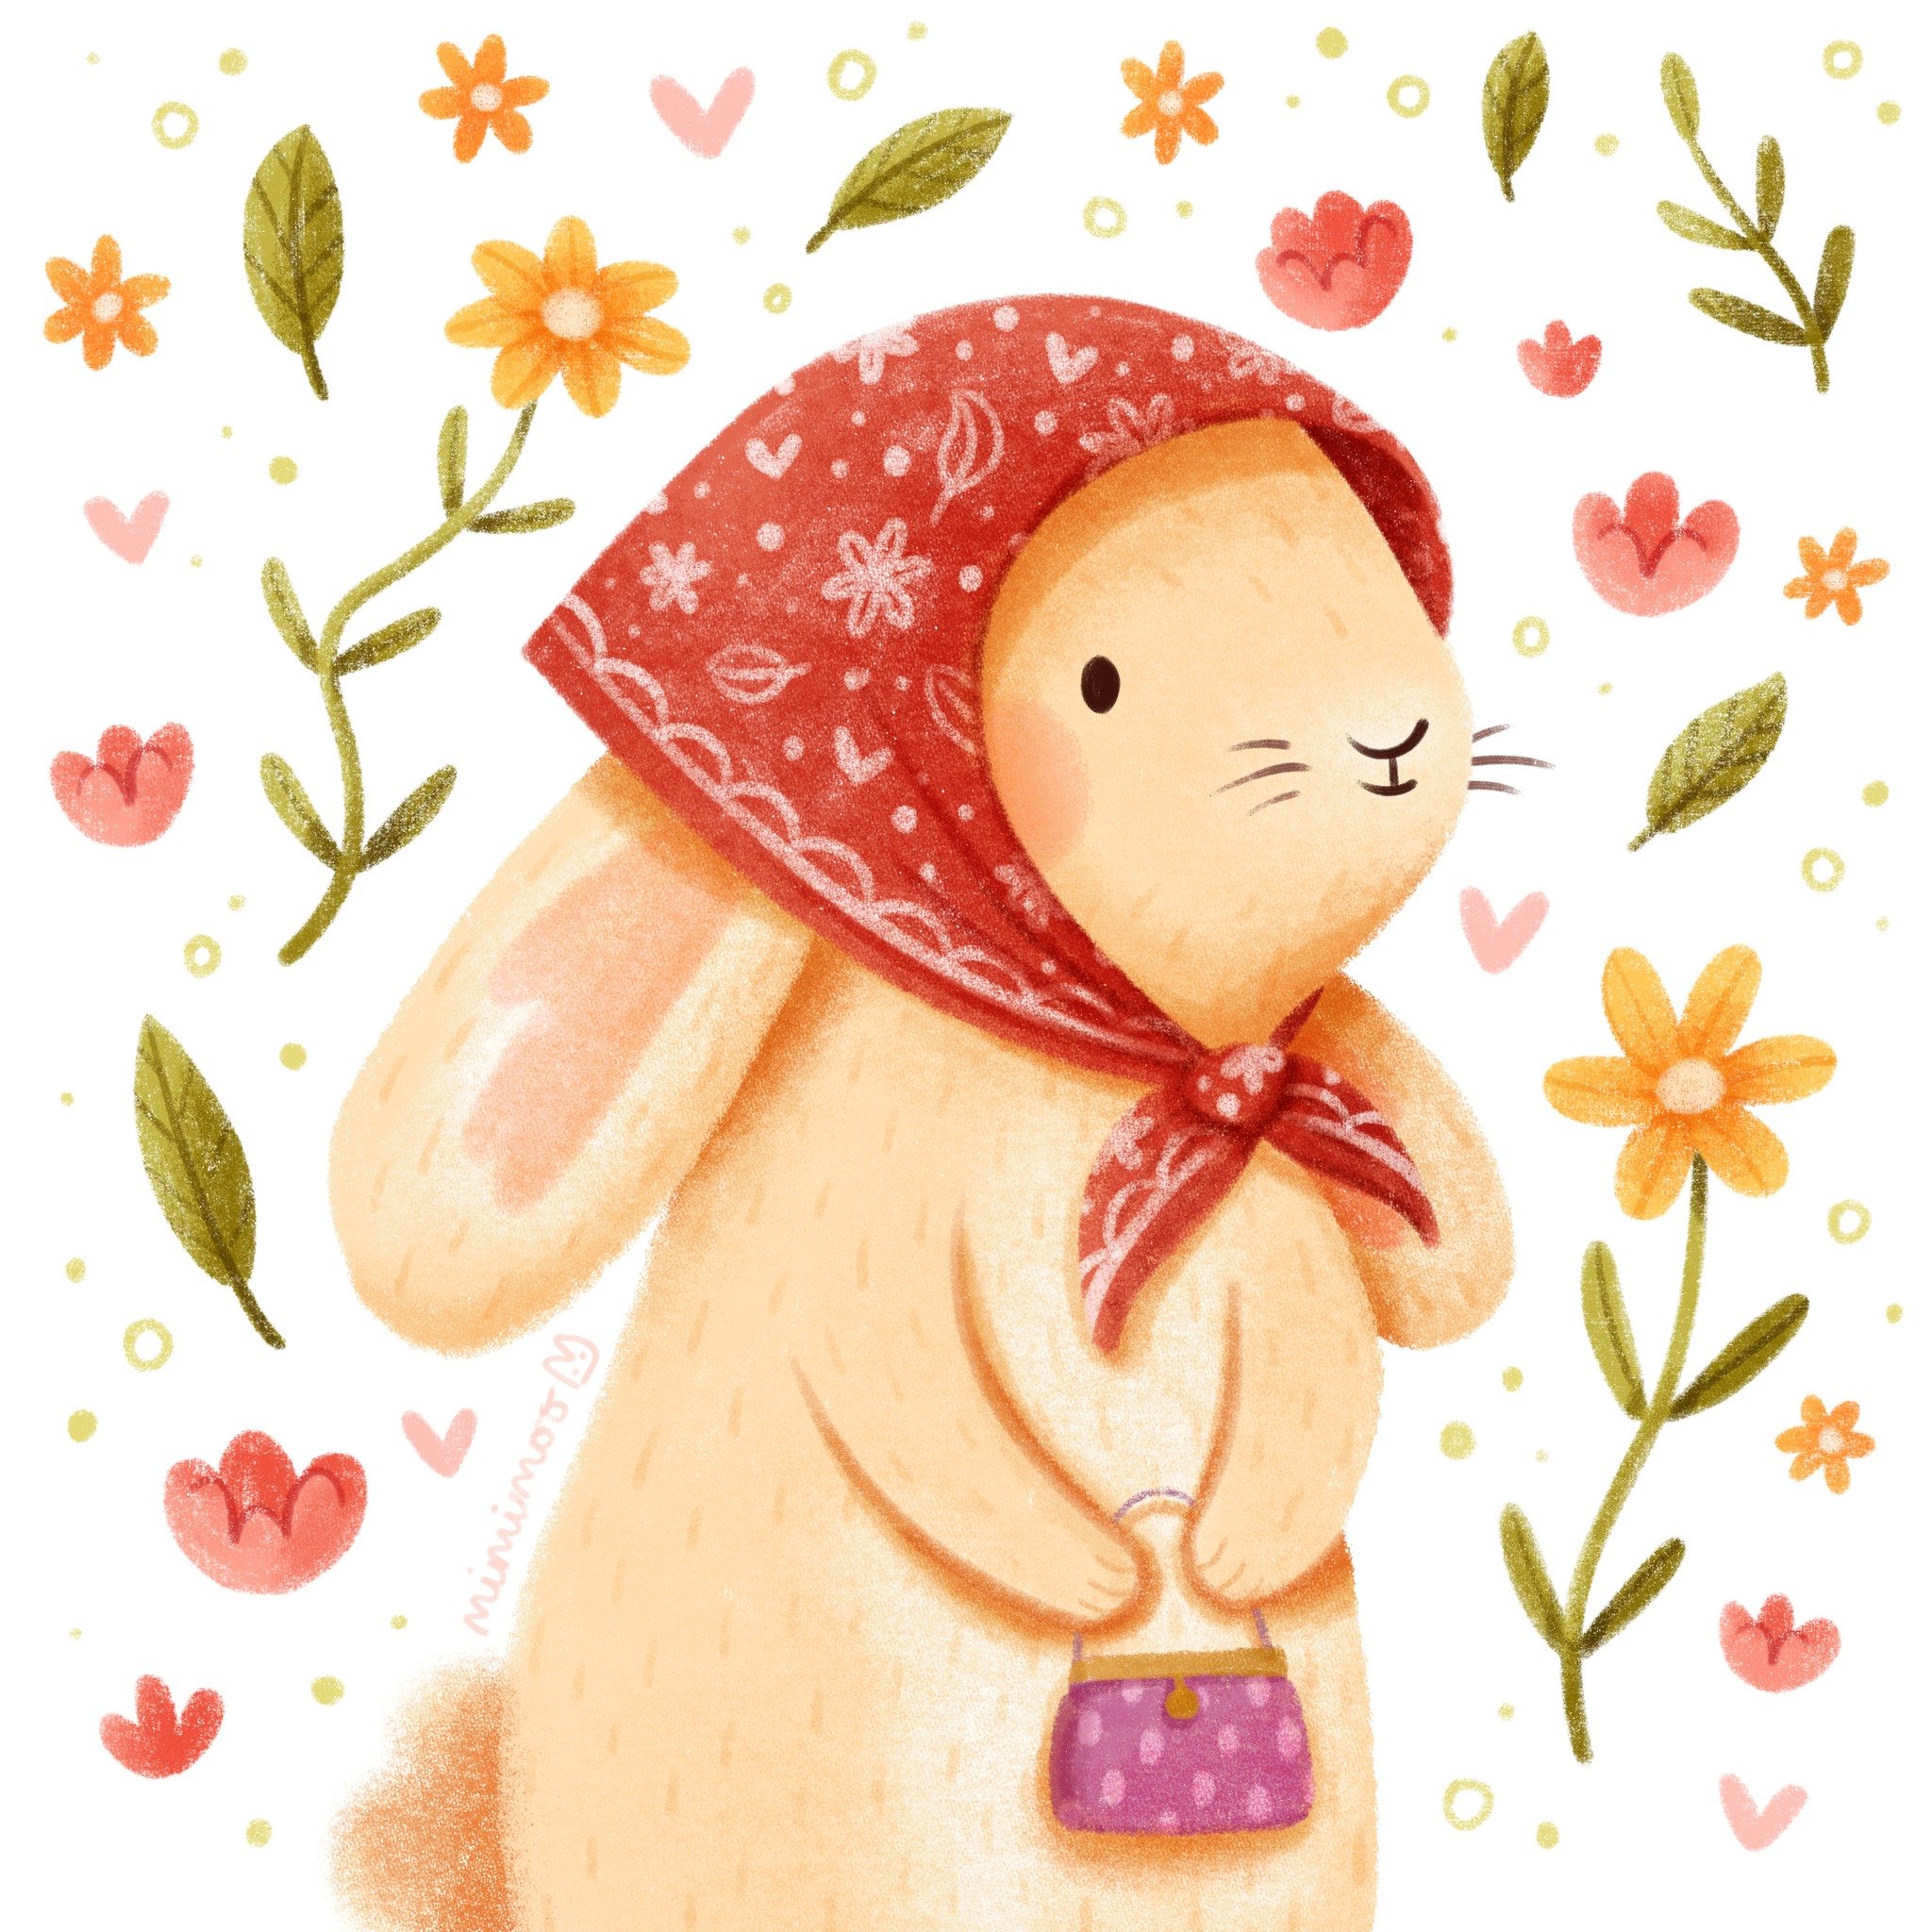 Little bunny is off to the shops! I wonder what she will buy today: maybe some bakery treats, or a new scarf, or maybe some flowers? 🌷✨💖

Brushes I used (from my brush packs):
🌷 Mimi Simple Sketching for initial sketch
🌷 Mimi Big Fuzzy Brush, Tex